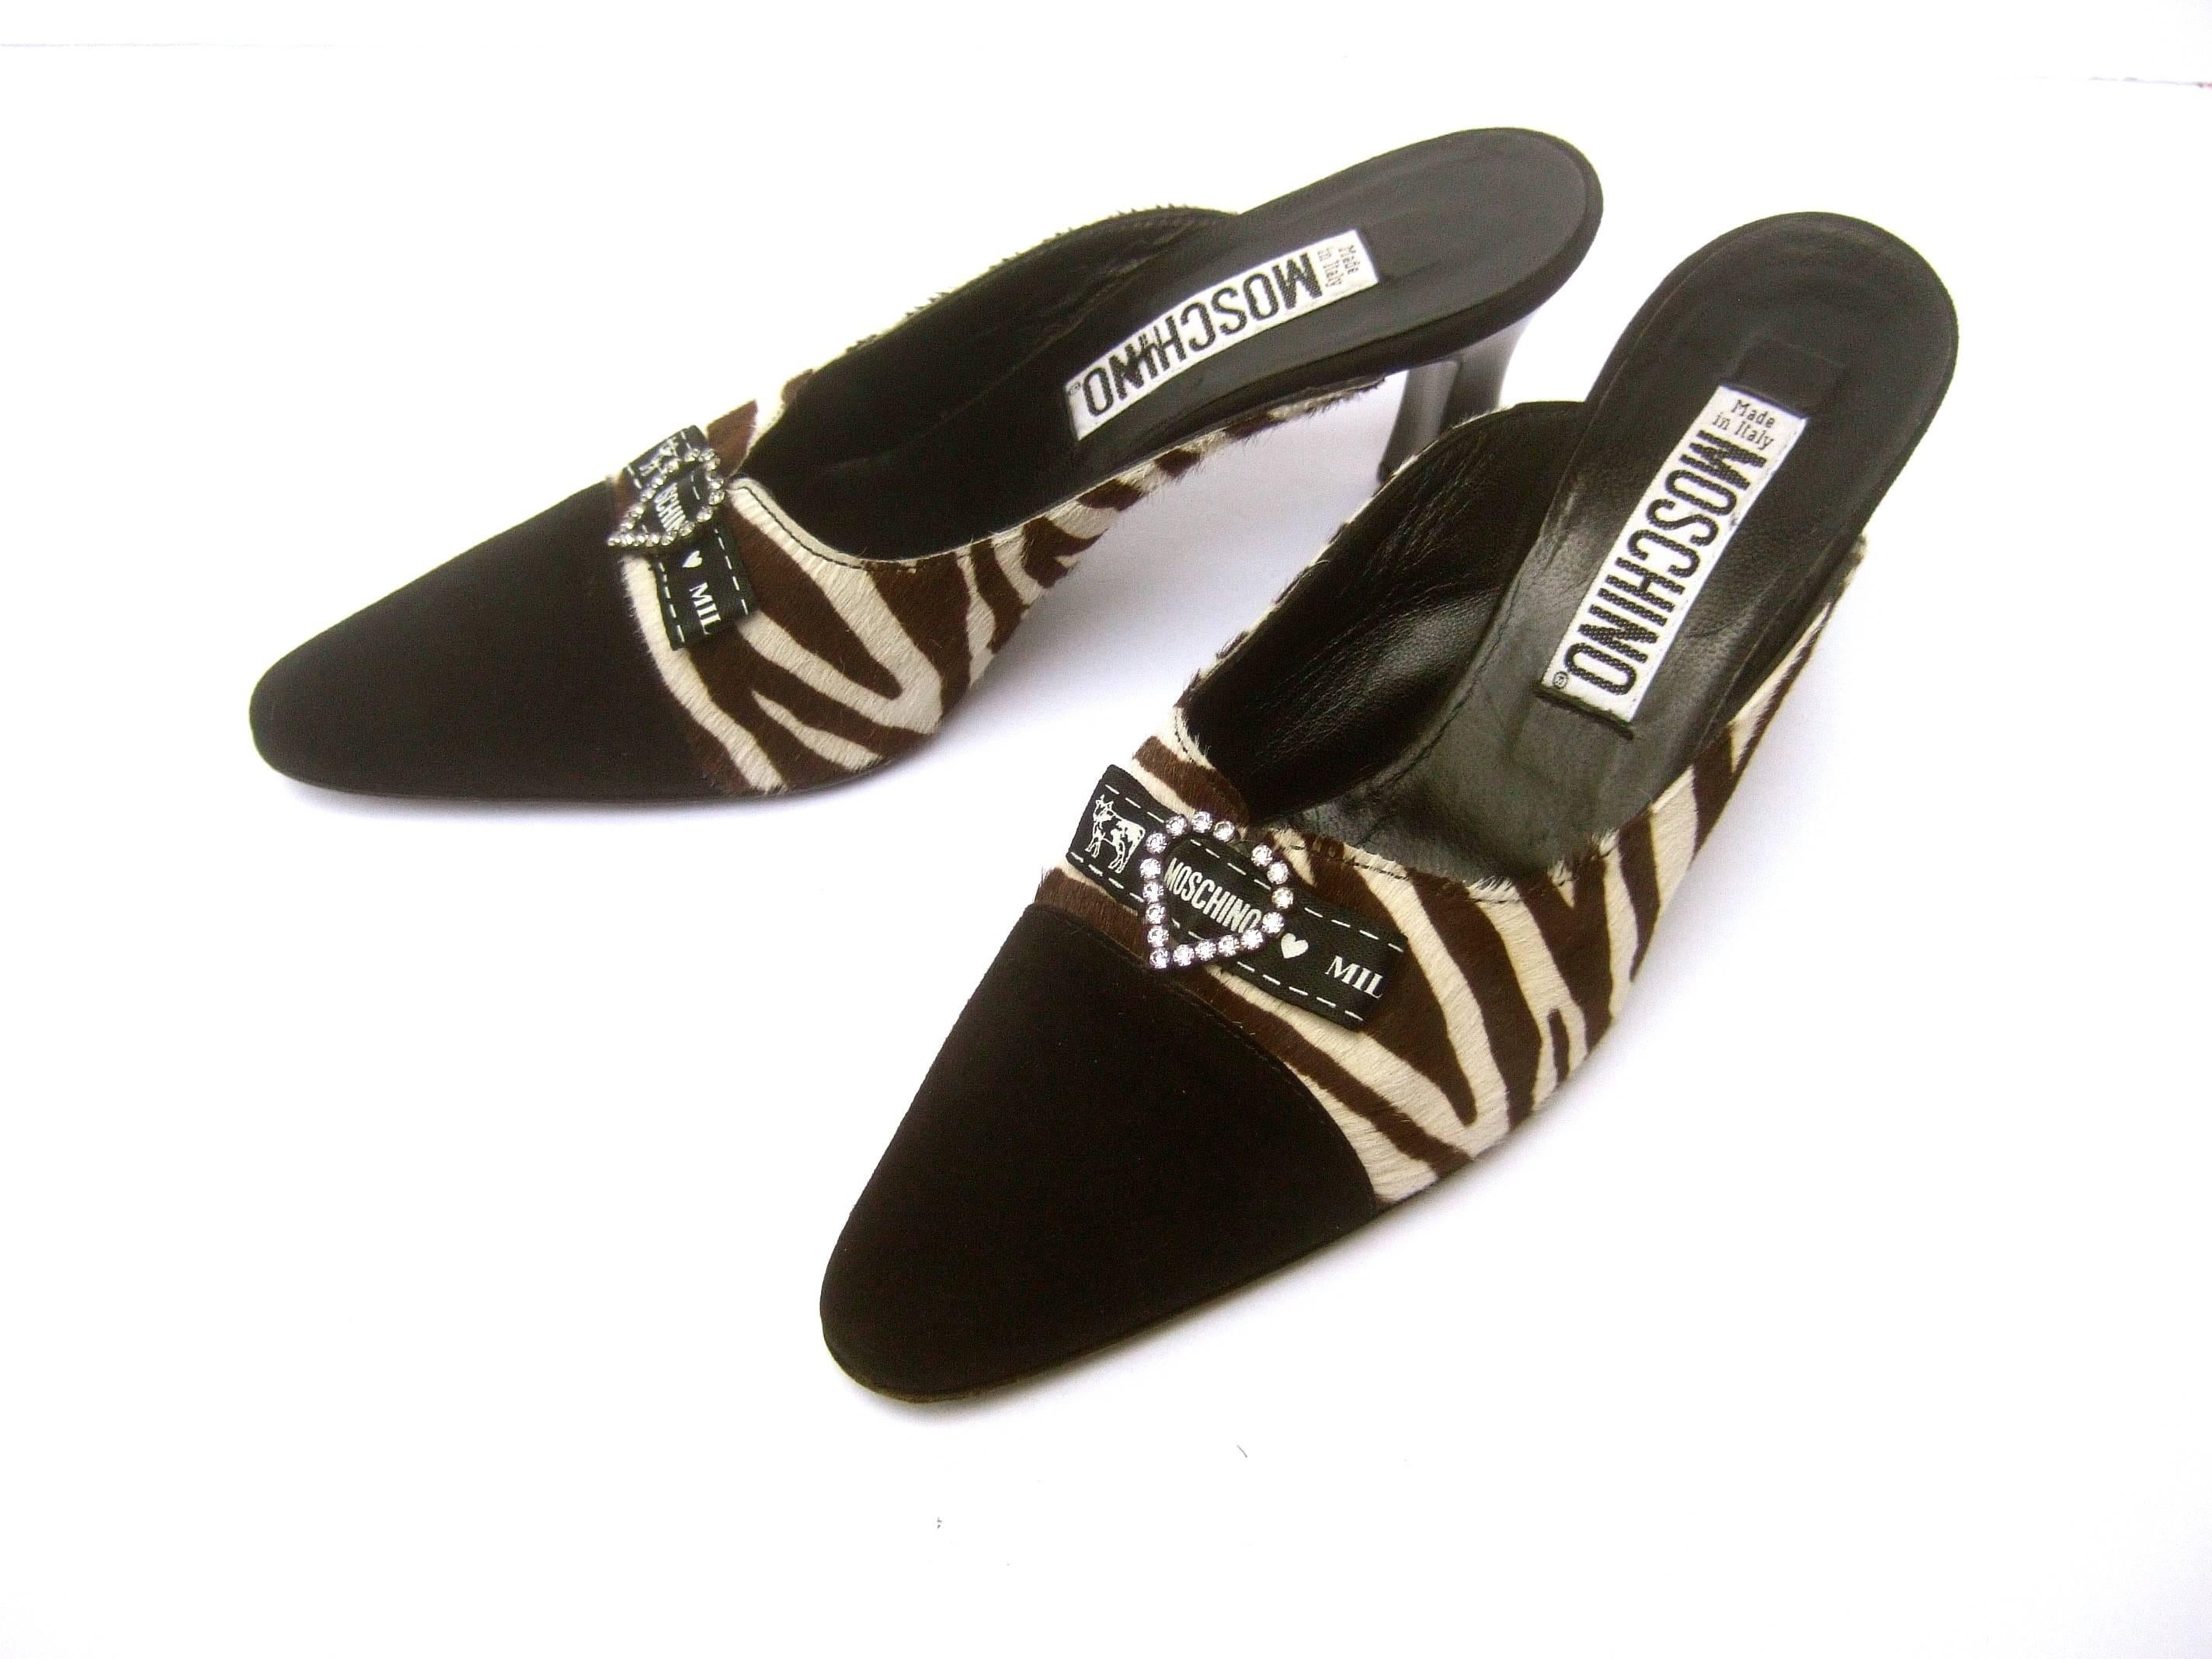 ***RESERVED SALE PENDING FOR MONIQUE***
Moschino Italy Zebra print pony hair mules Size 37 or US Size 6.5
The stylish Italian shoes are designed 
with brown and cream zebra print pony fur

The pointed toes are covered with black suede
The front of